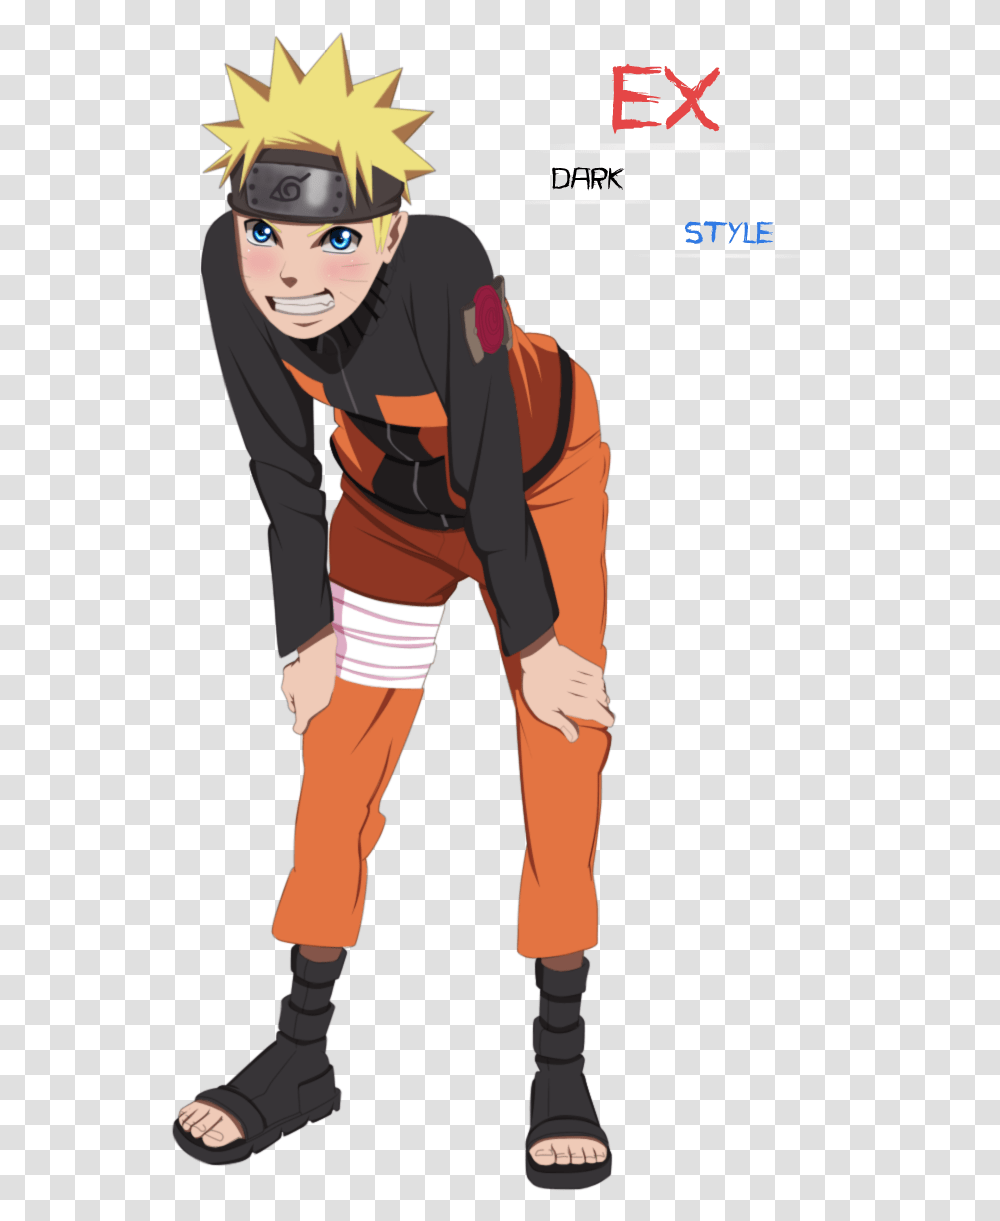 Naruto Uzumaki Render By Exdarkstyle Naruto, Person, Sleeve, Pants Transparent Png